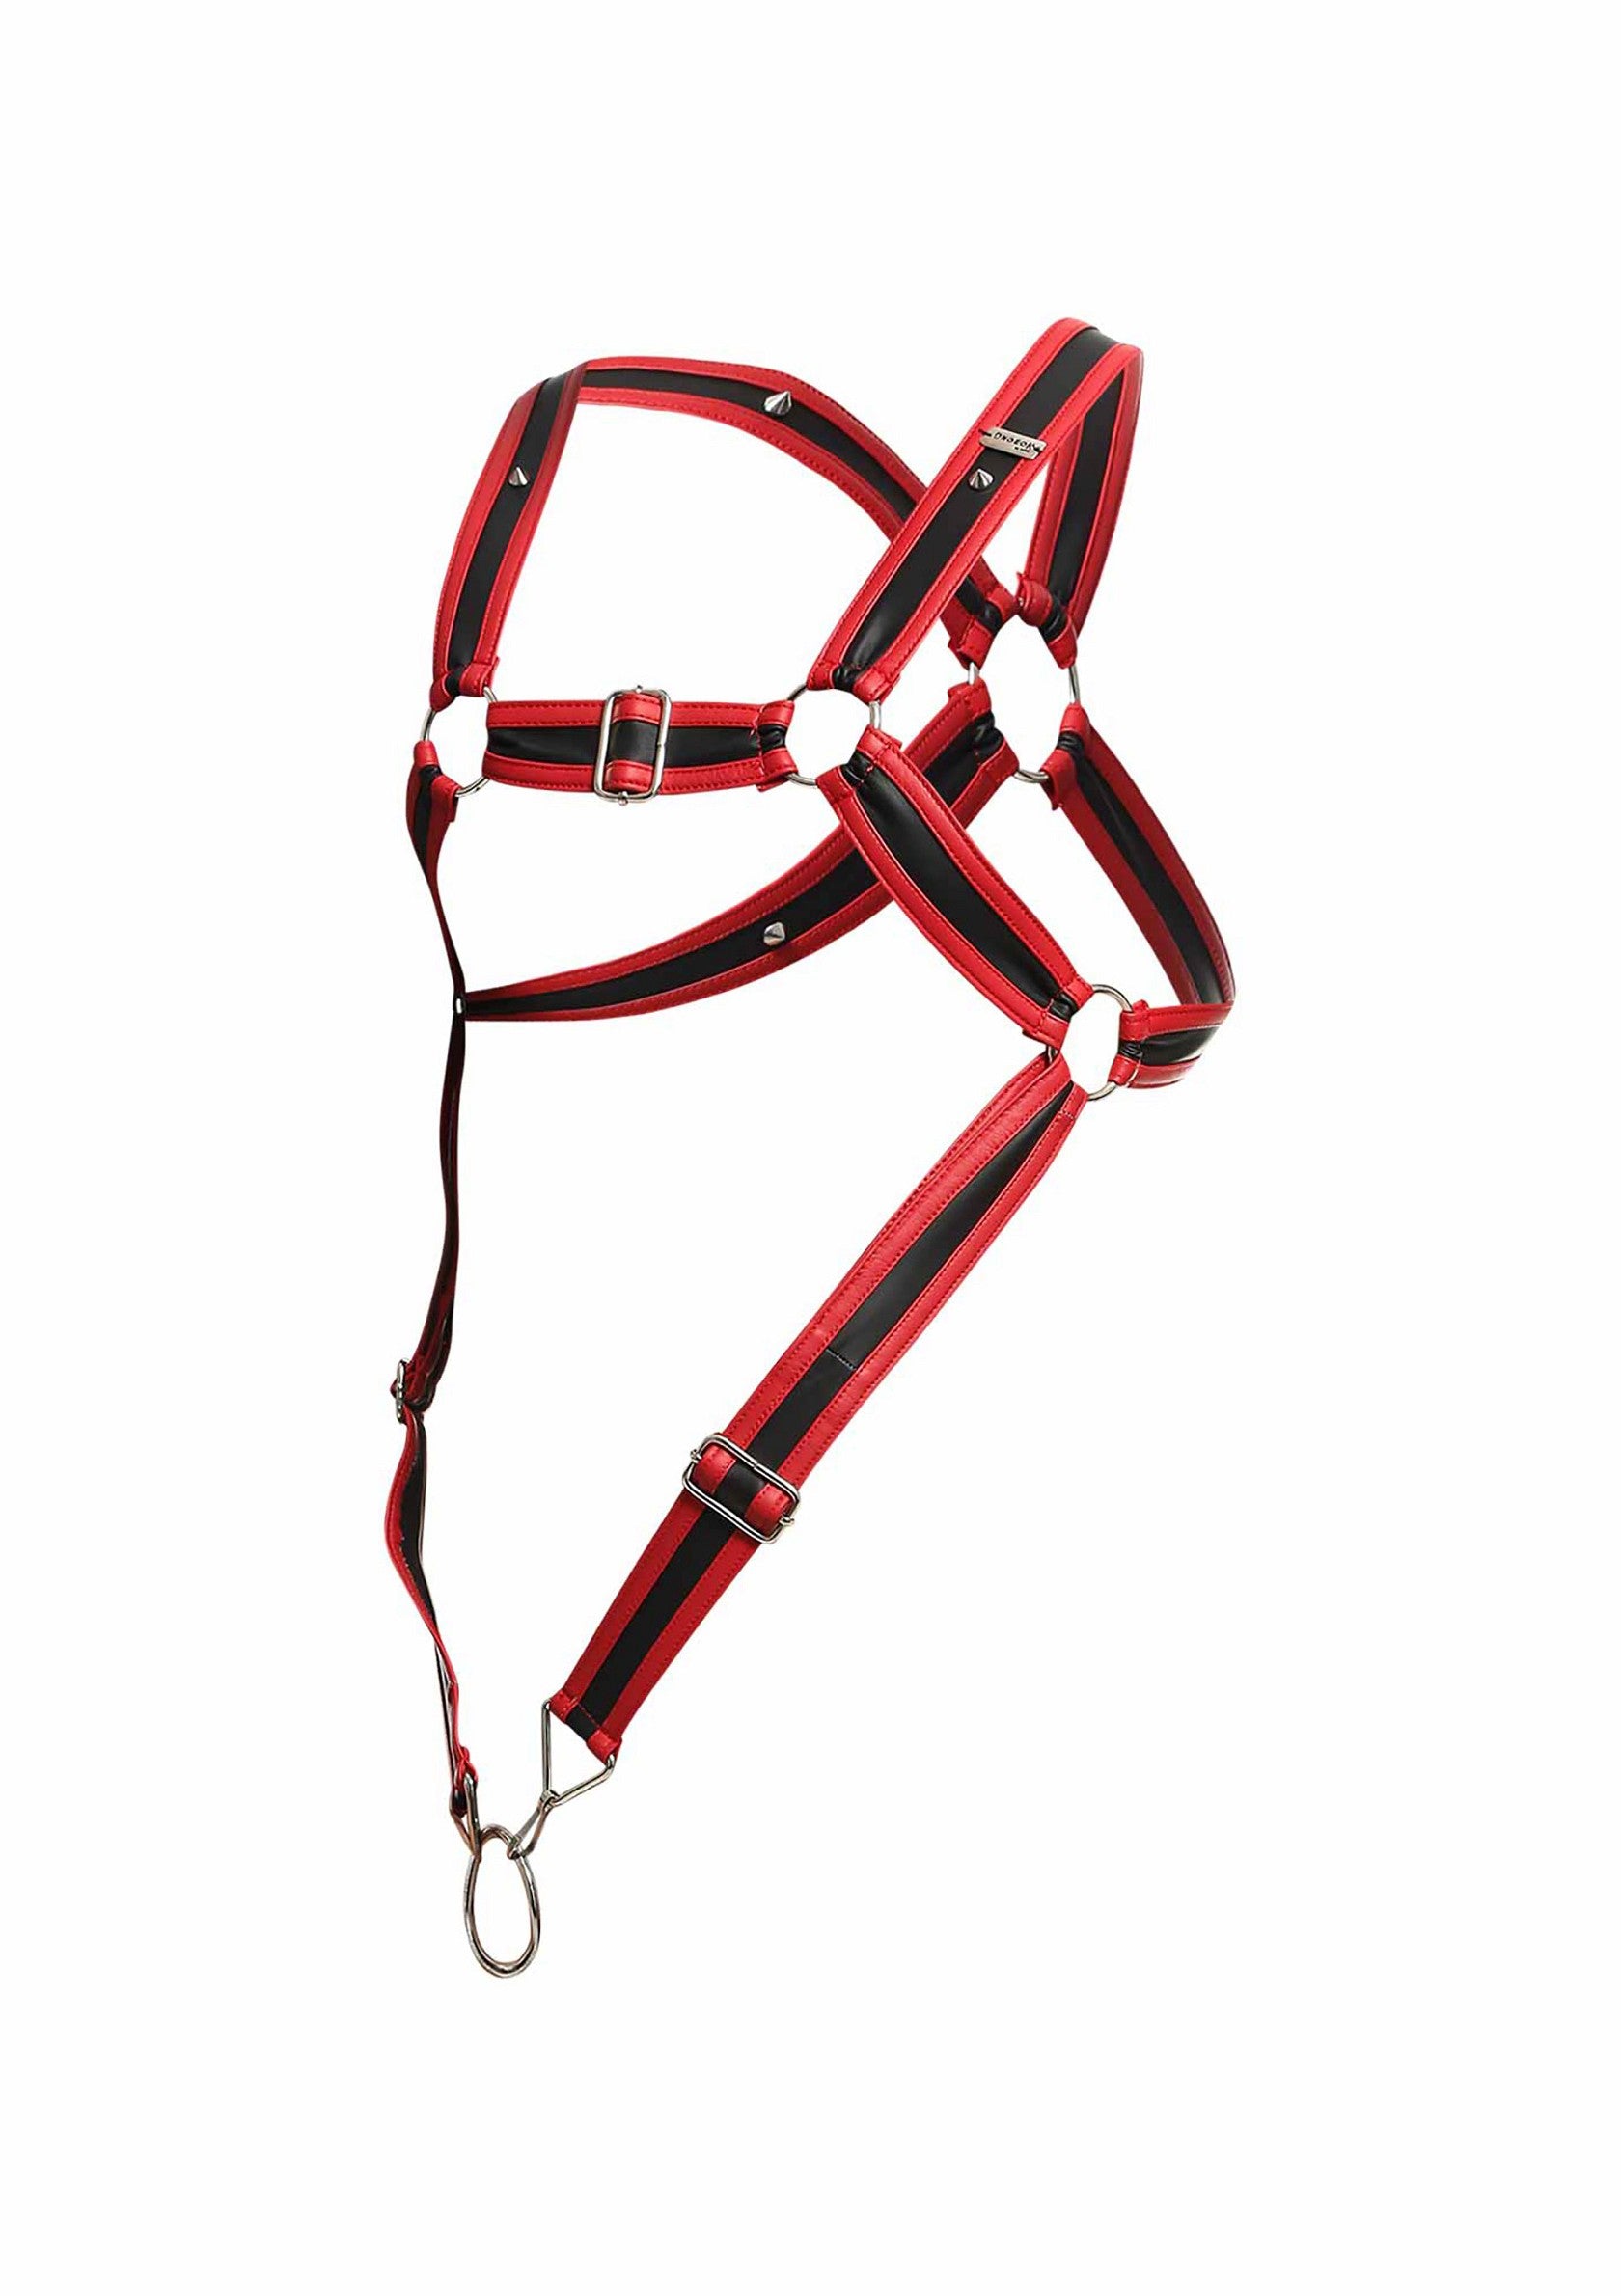 MOB Eroticwear Dngeon Cross Cockring Harness RED O/S - 0